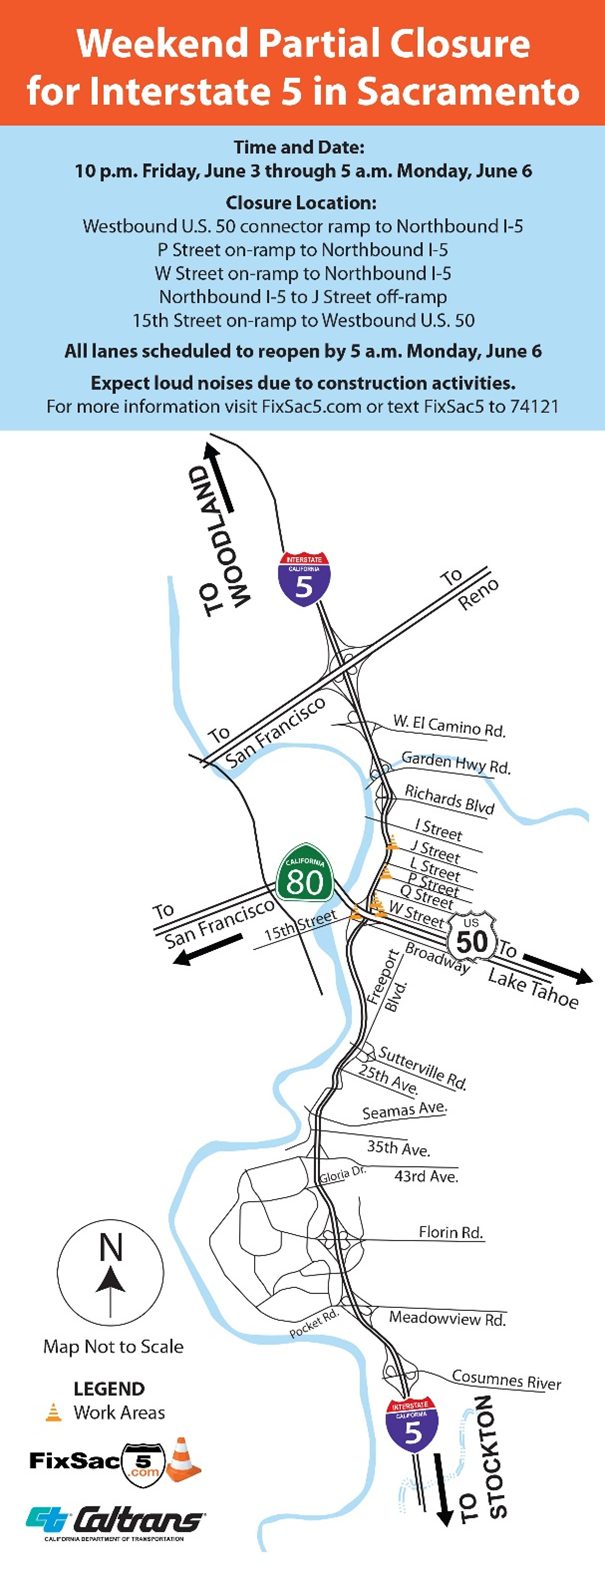 Map of partial closure for Interstate 5 in Sacramento from the U.S. 50 interchange to J Street from 10 p.m. Friday, June 3 through 5 a.m. Monday, June 6